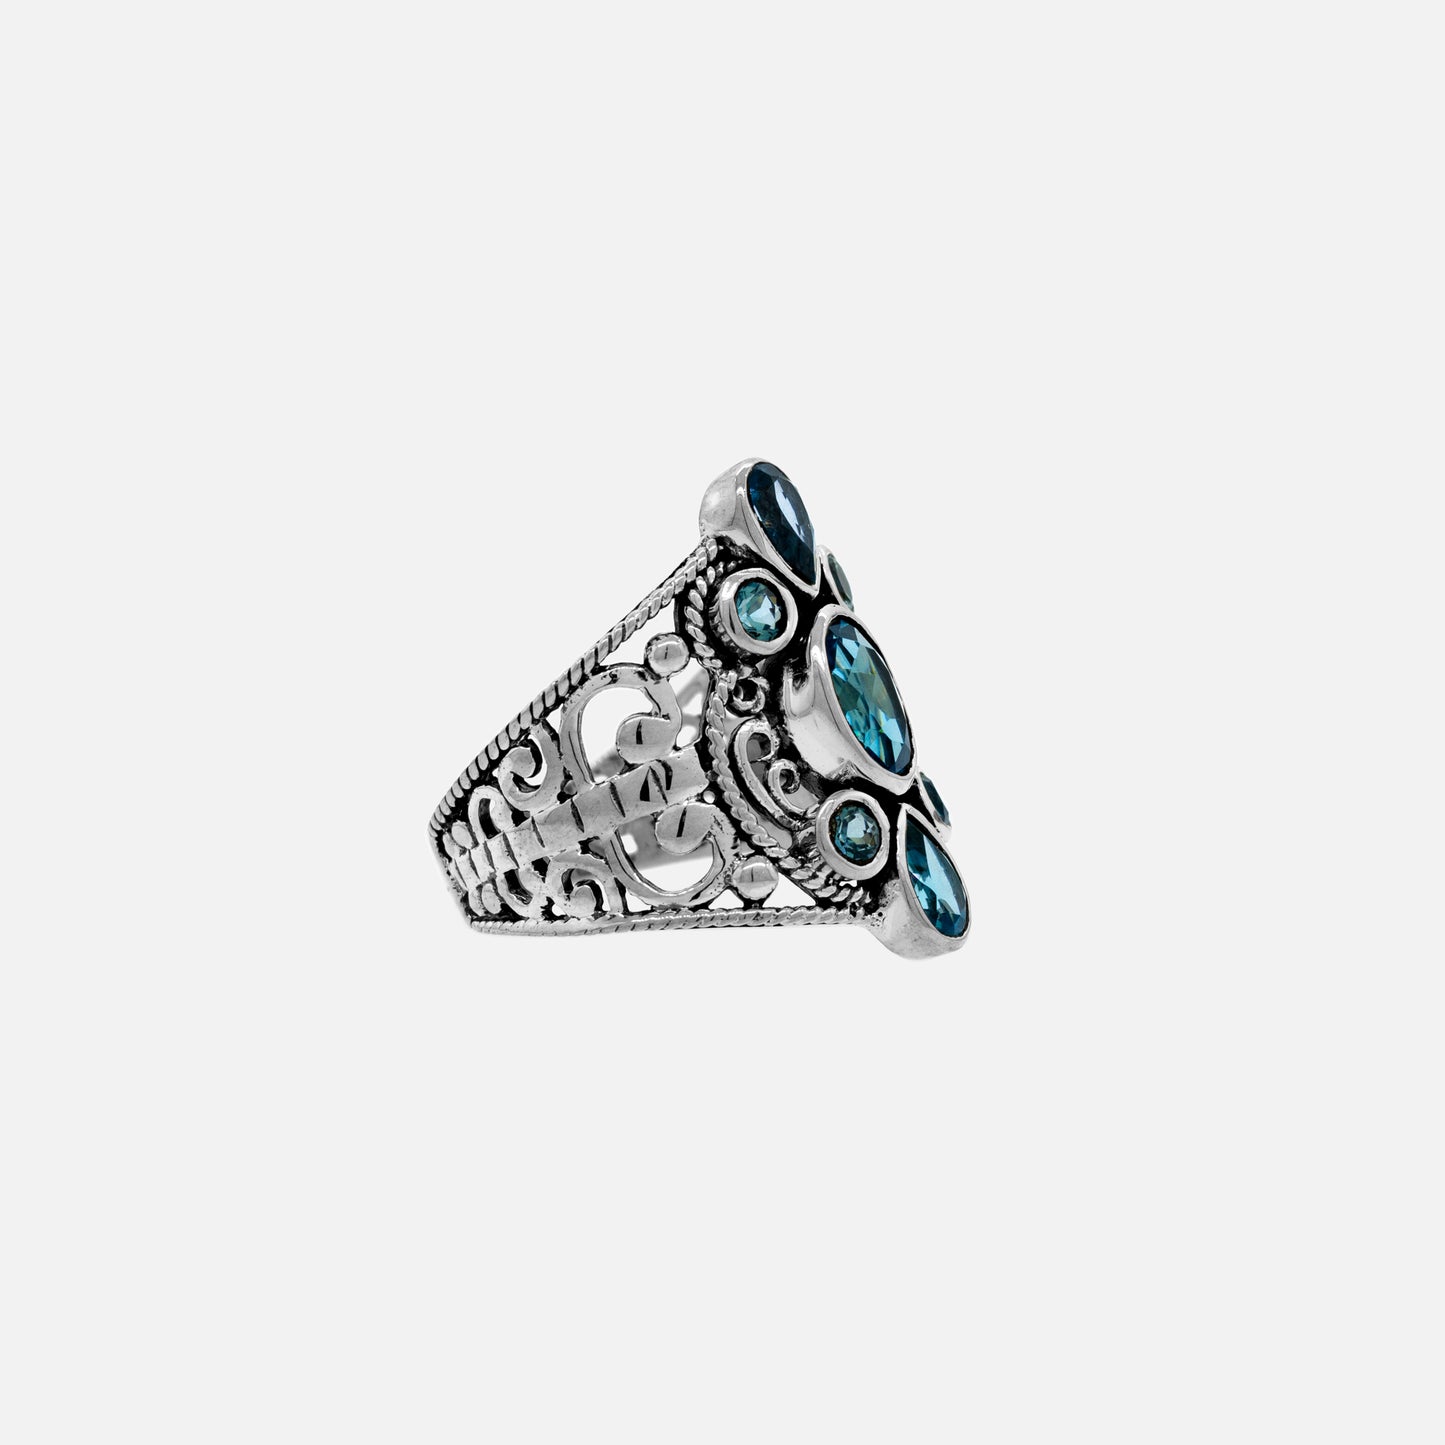 A passerby noticed a Super Silver ring adorned with sparkling blue topaz stones from the Various Beautiful Stone Rings with Filigree Cutout collection.